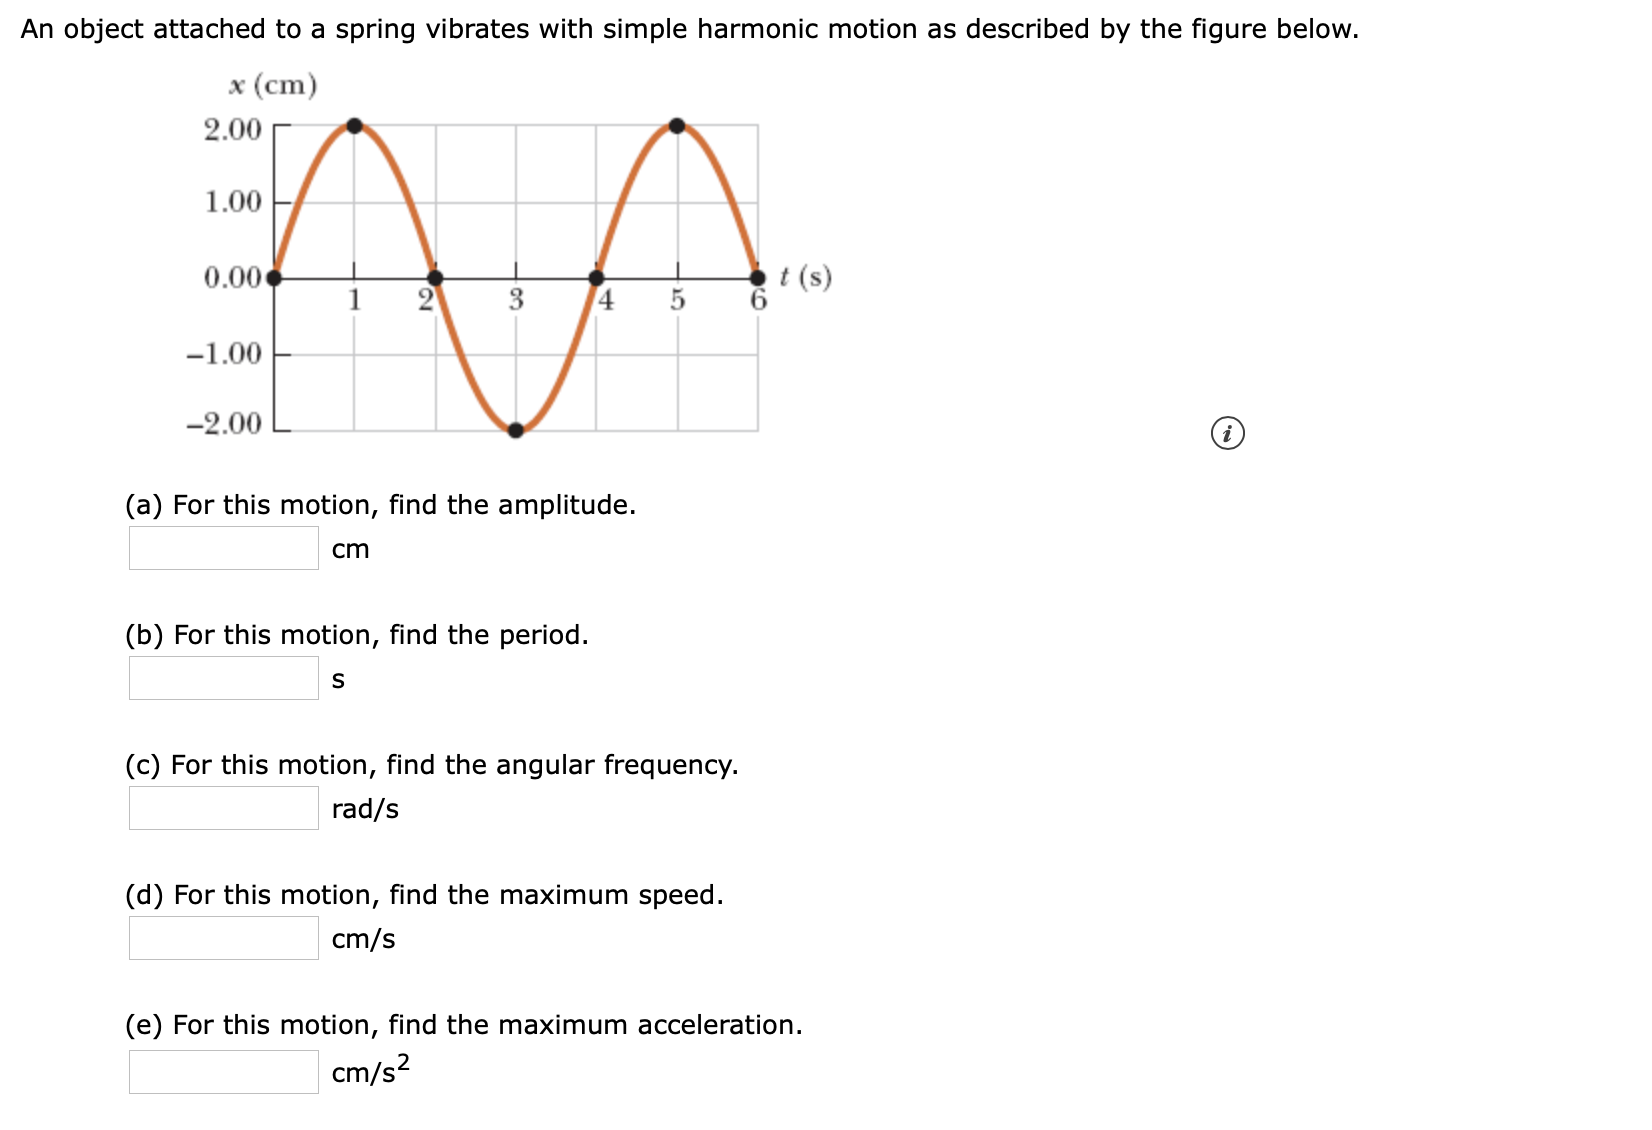 An object attached to a spring vibrates with simple harmonic motion as described by the figure below.
x (ст)
2.00
1.00
0.00
t (s)
3
4
5
-1.00
-2.00
(a) For this motion, find the amplitude.
cm
(b) For this motion, find the period.
